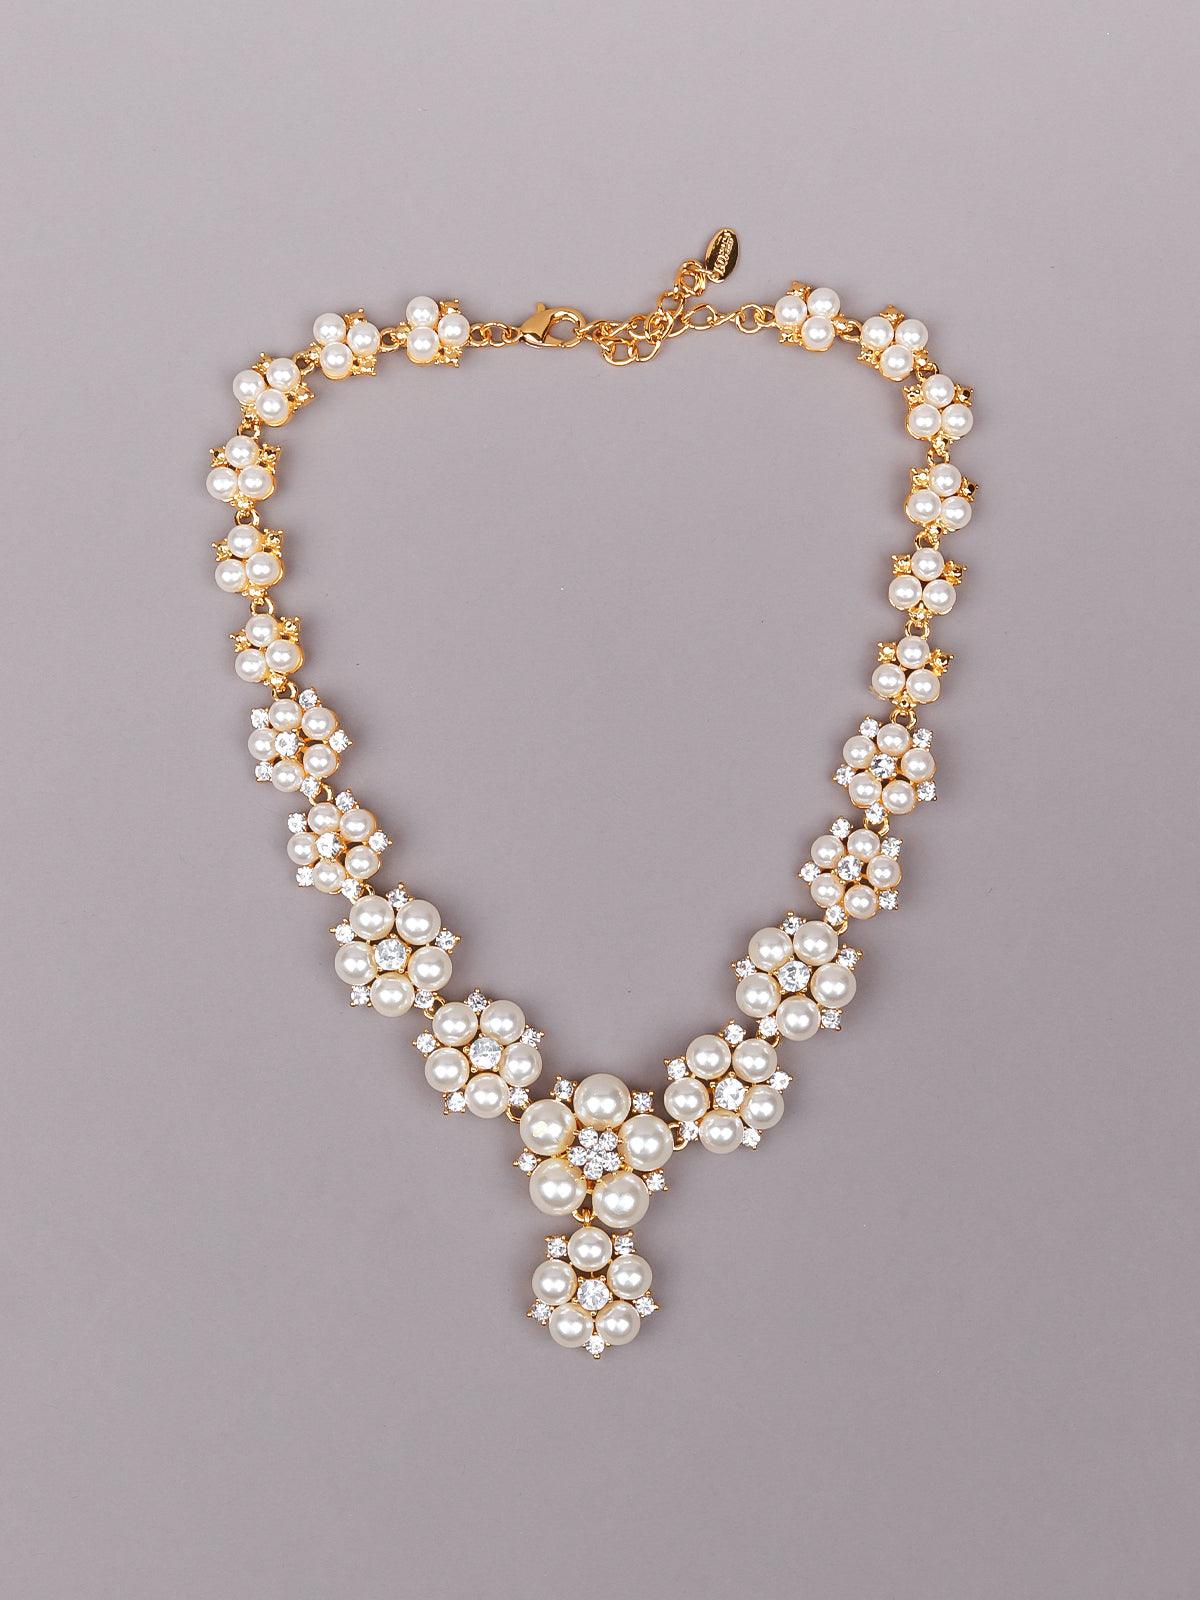 Women's High Quality White Beaded Necklace Set - Odette